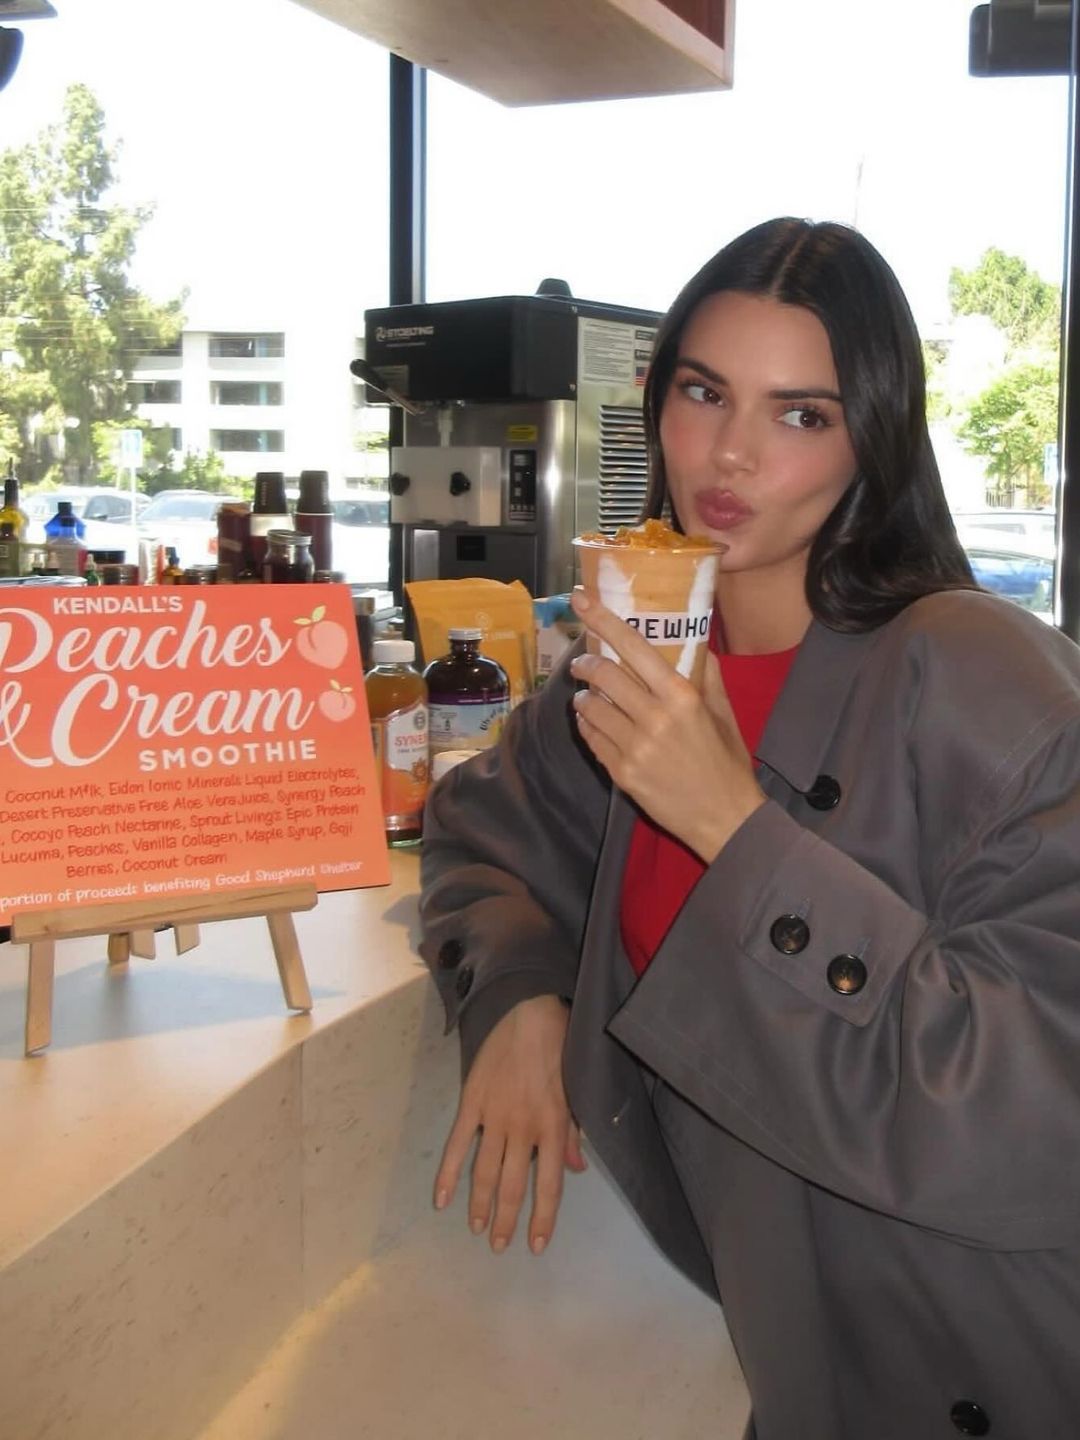 Kendall Jenner poses with her Erewhon smoothie 